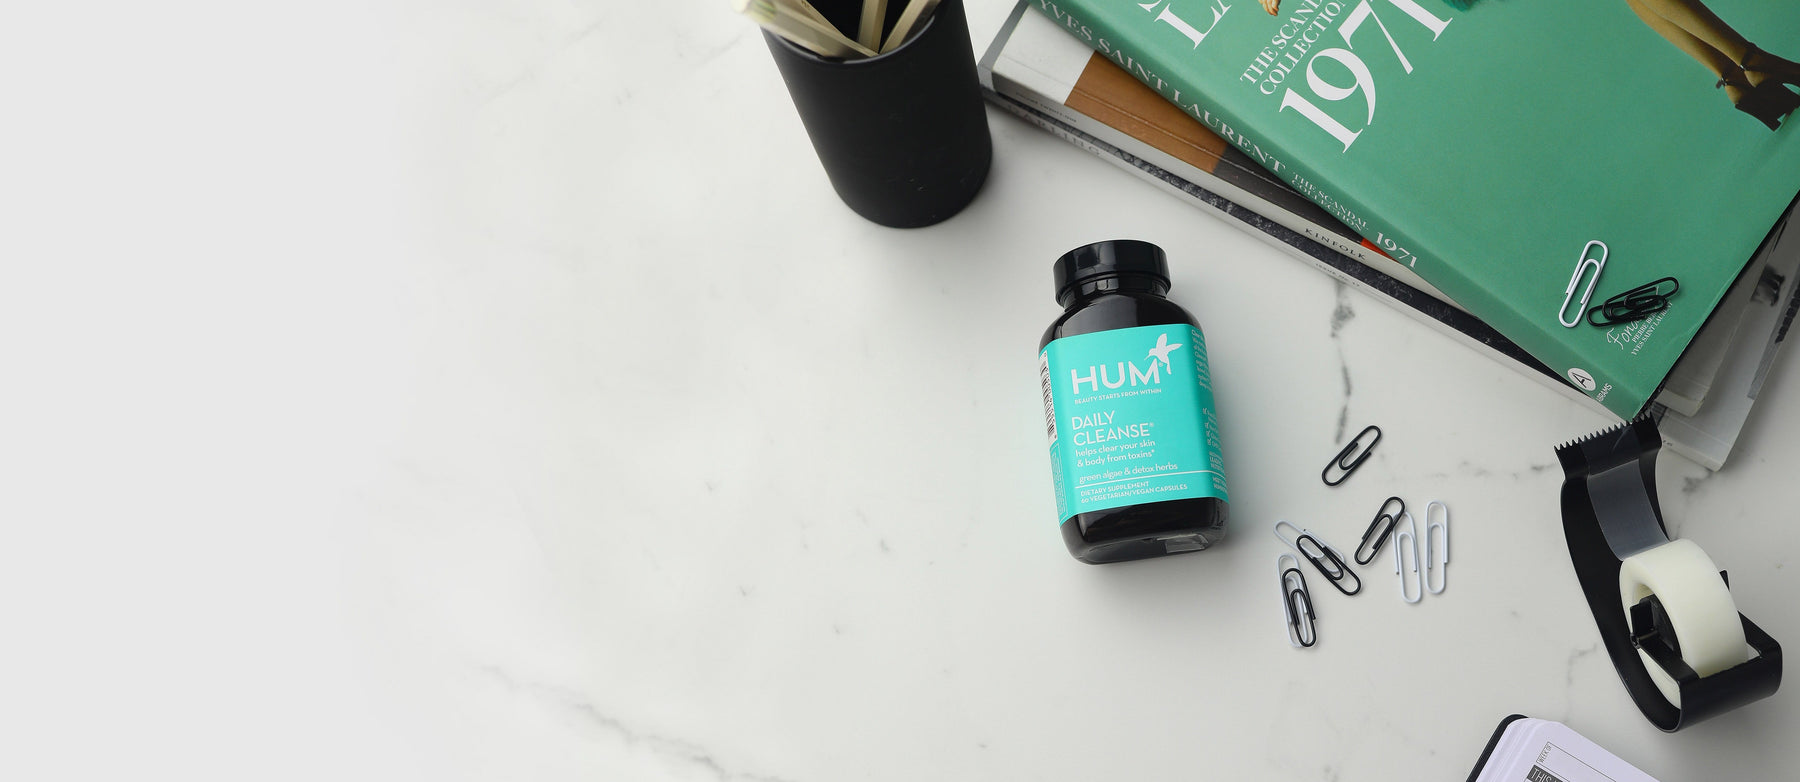 Meet HUM Nutrition | Curated by milk + honey